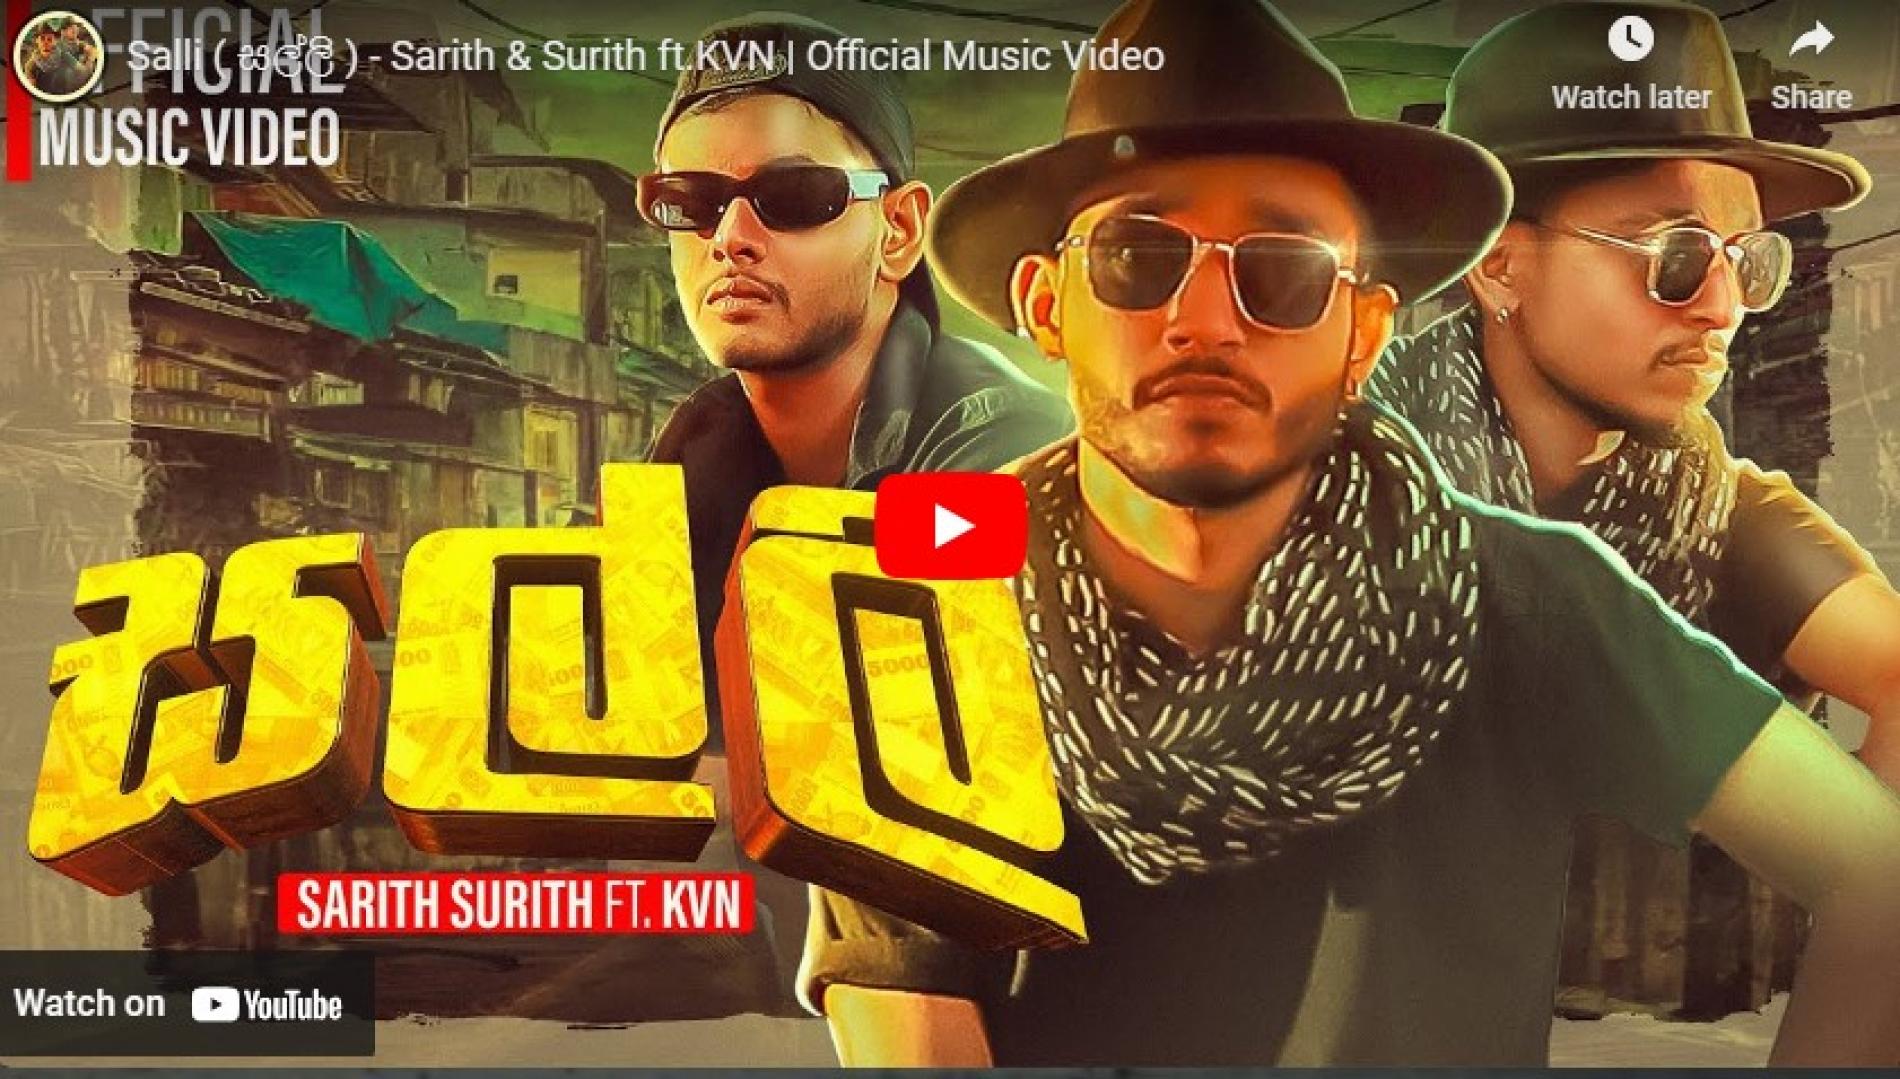 New Music : Salli ( සල්ලි ) – Sarith & Surith ft.KVN | Official Music Video